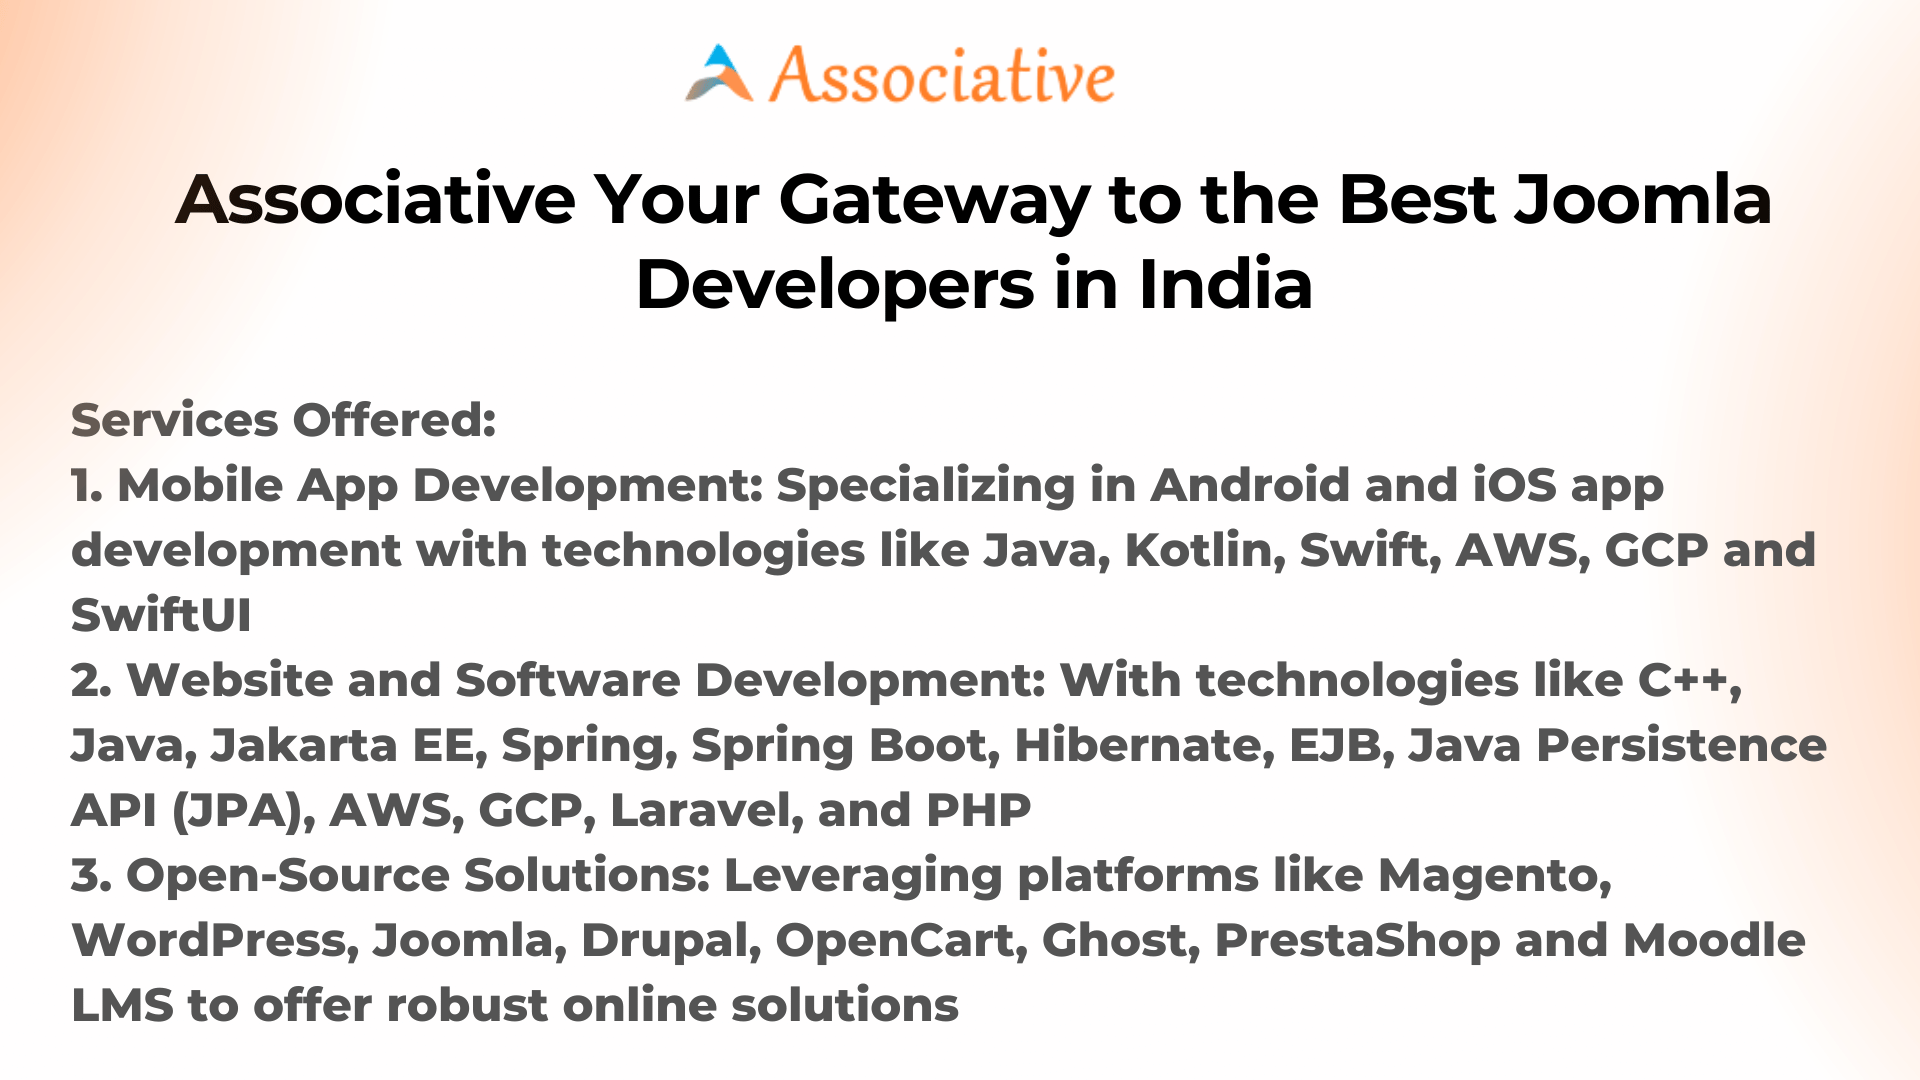 Associative Your Gateway to the Best Joomla Developers in India